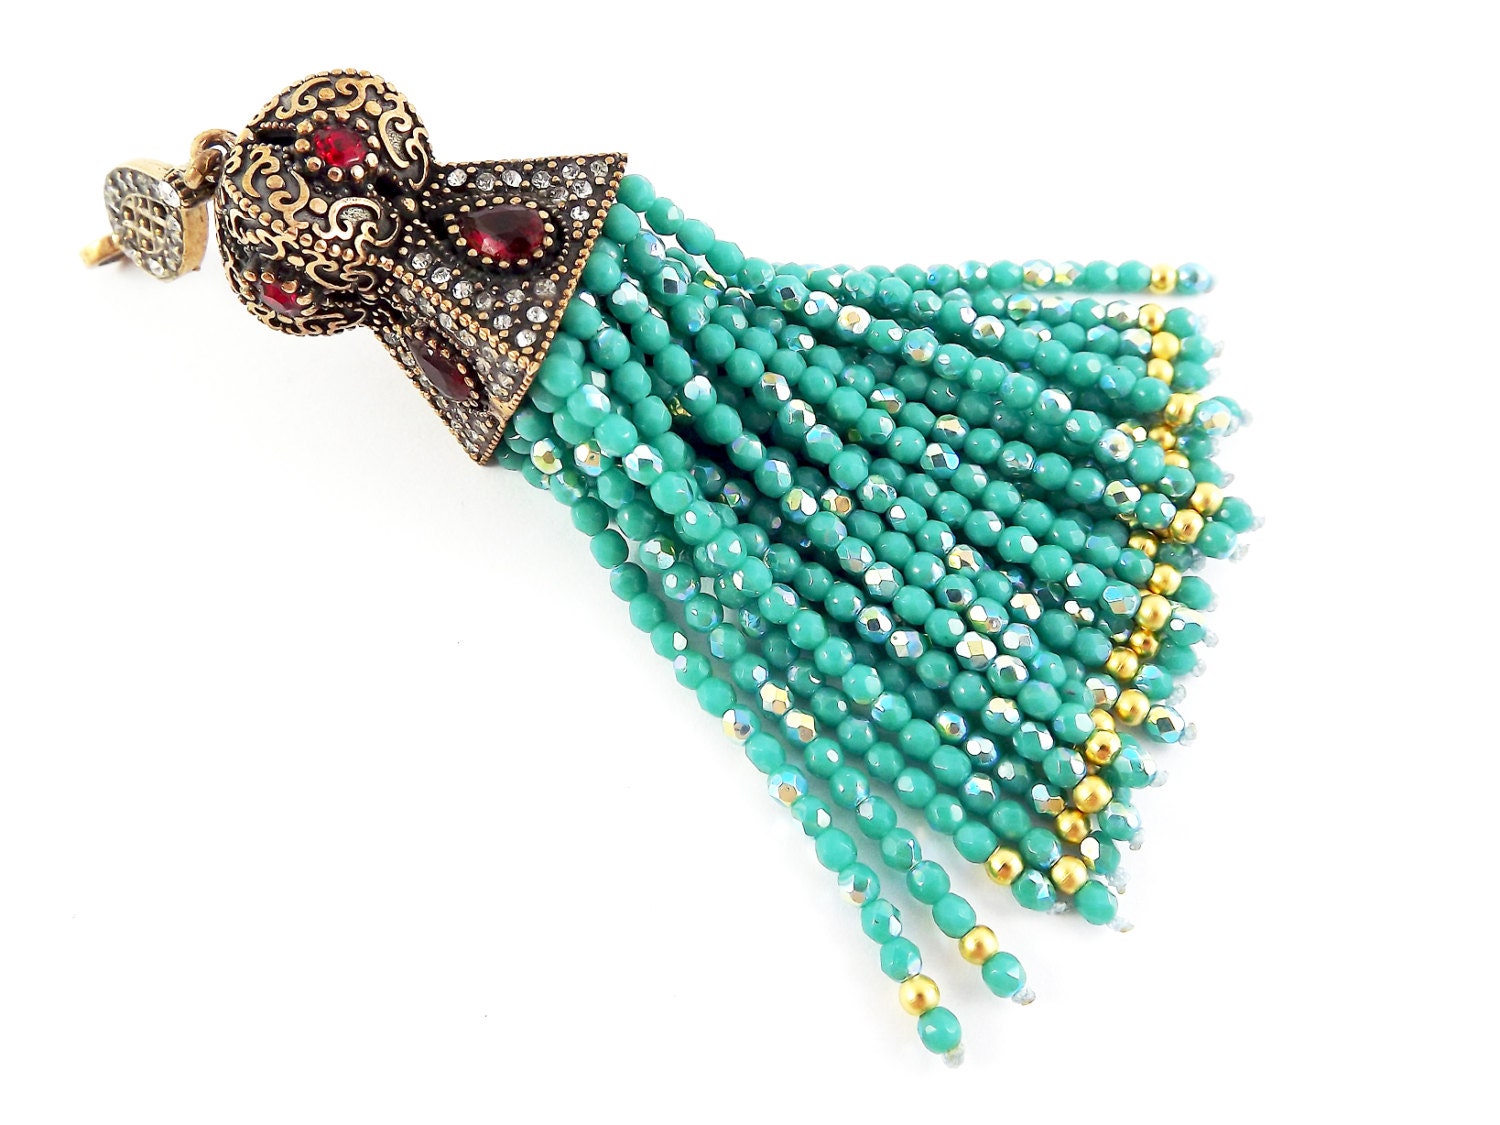 Large Long AB Turquoise Facet Cut Crystal Beaded Tassel with Crystal Accents - Antique Bronze - 1PC